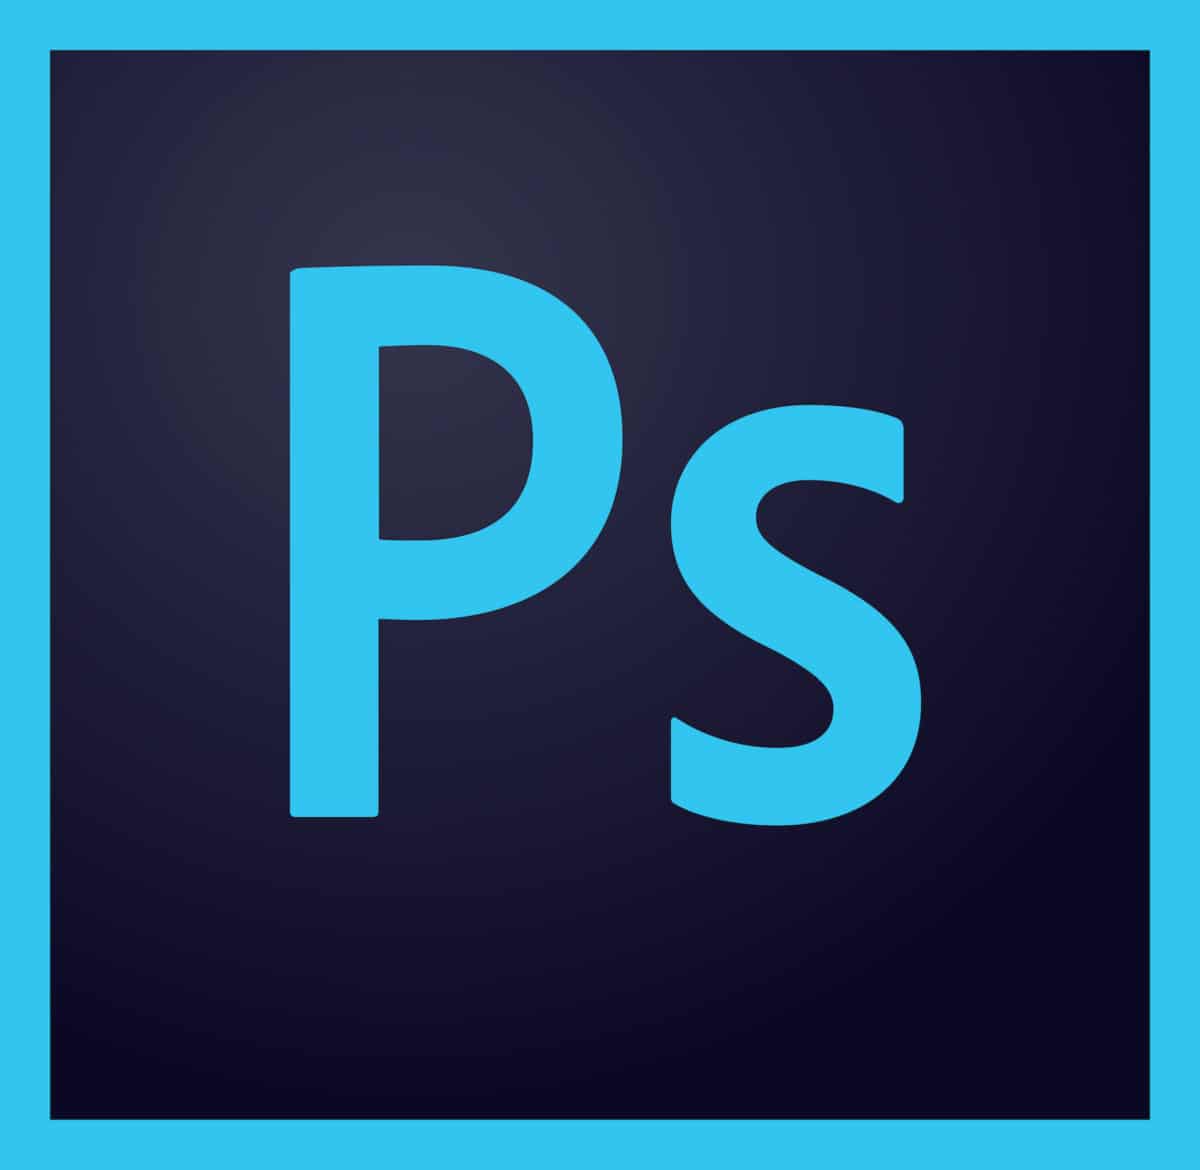 An app to photoshop pictures